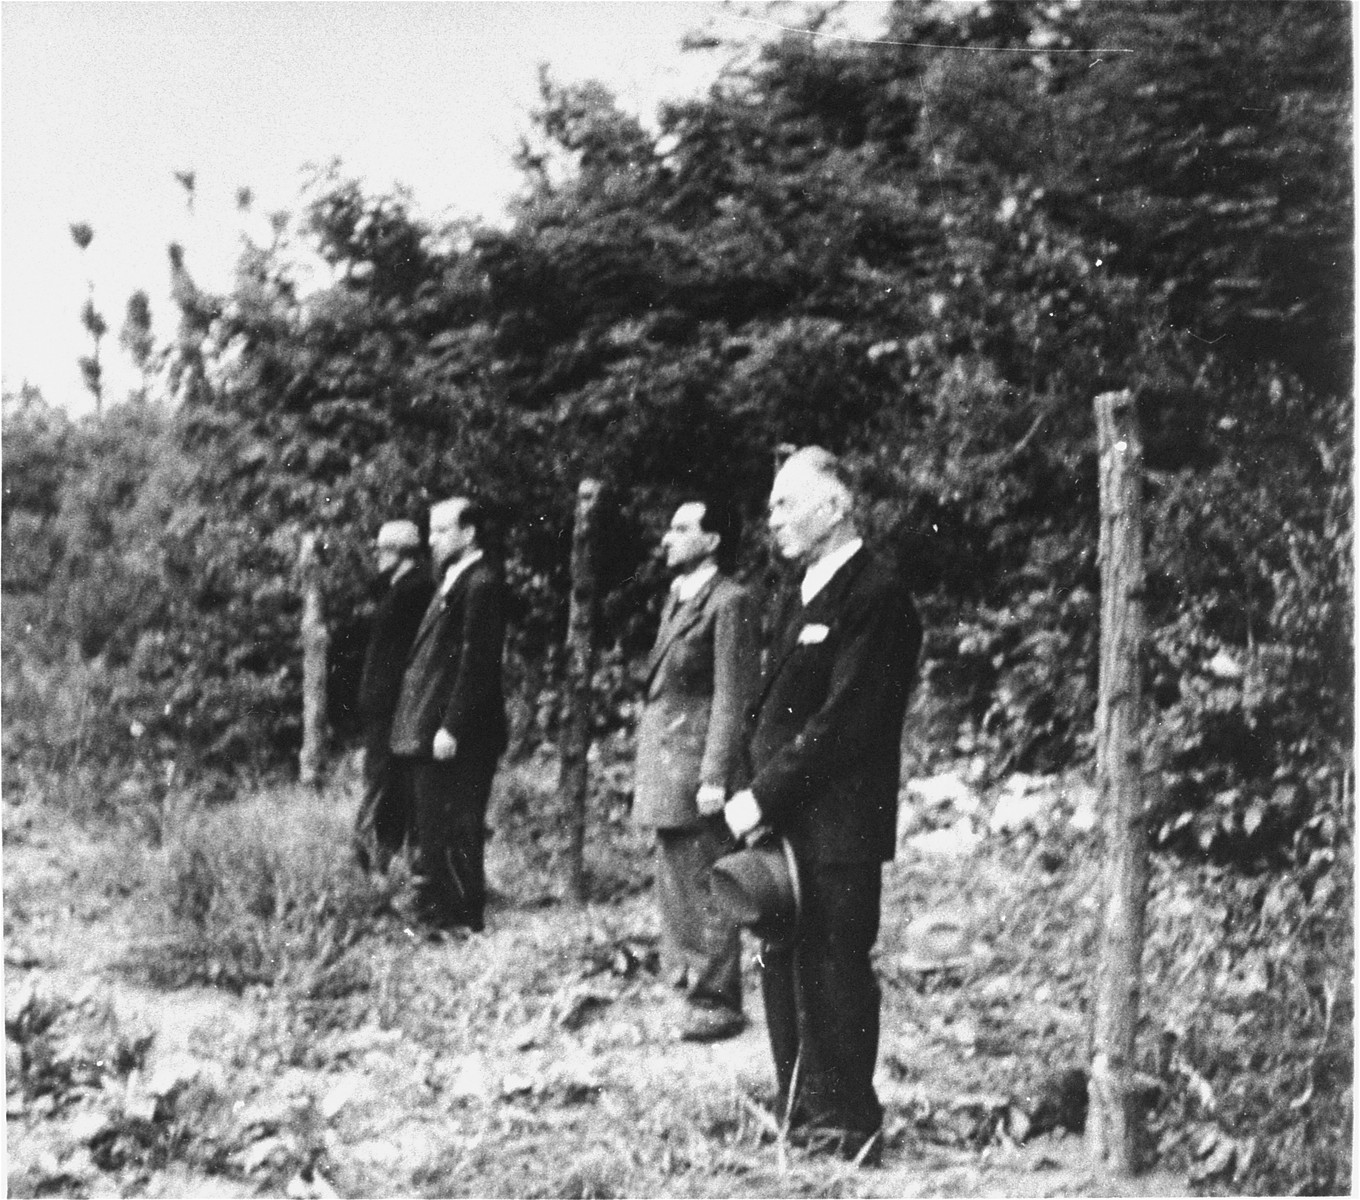 The execution of Marshall Ion Antonescu, former dictator of Romania (1940-1944) at the Fort Jilava prison in a suburb of Bucharest.  

He was executed along with three others: Mihai Antonescu (the former vice-president and minister of foreign affairs), Gheorge Alexianu (former governor of Transnistria), and General C.Z. Vasiliu (former deputy minister of interior affairs and head of the gendarmerie).